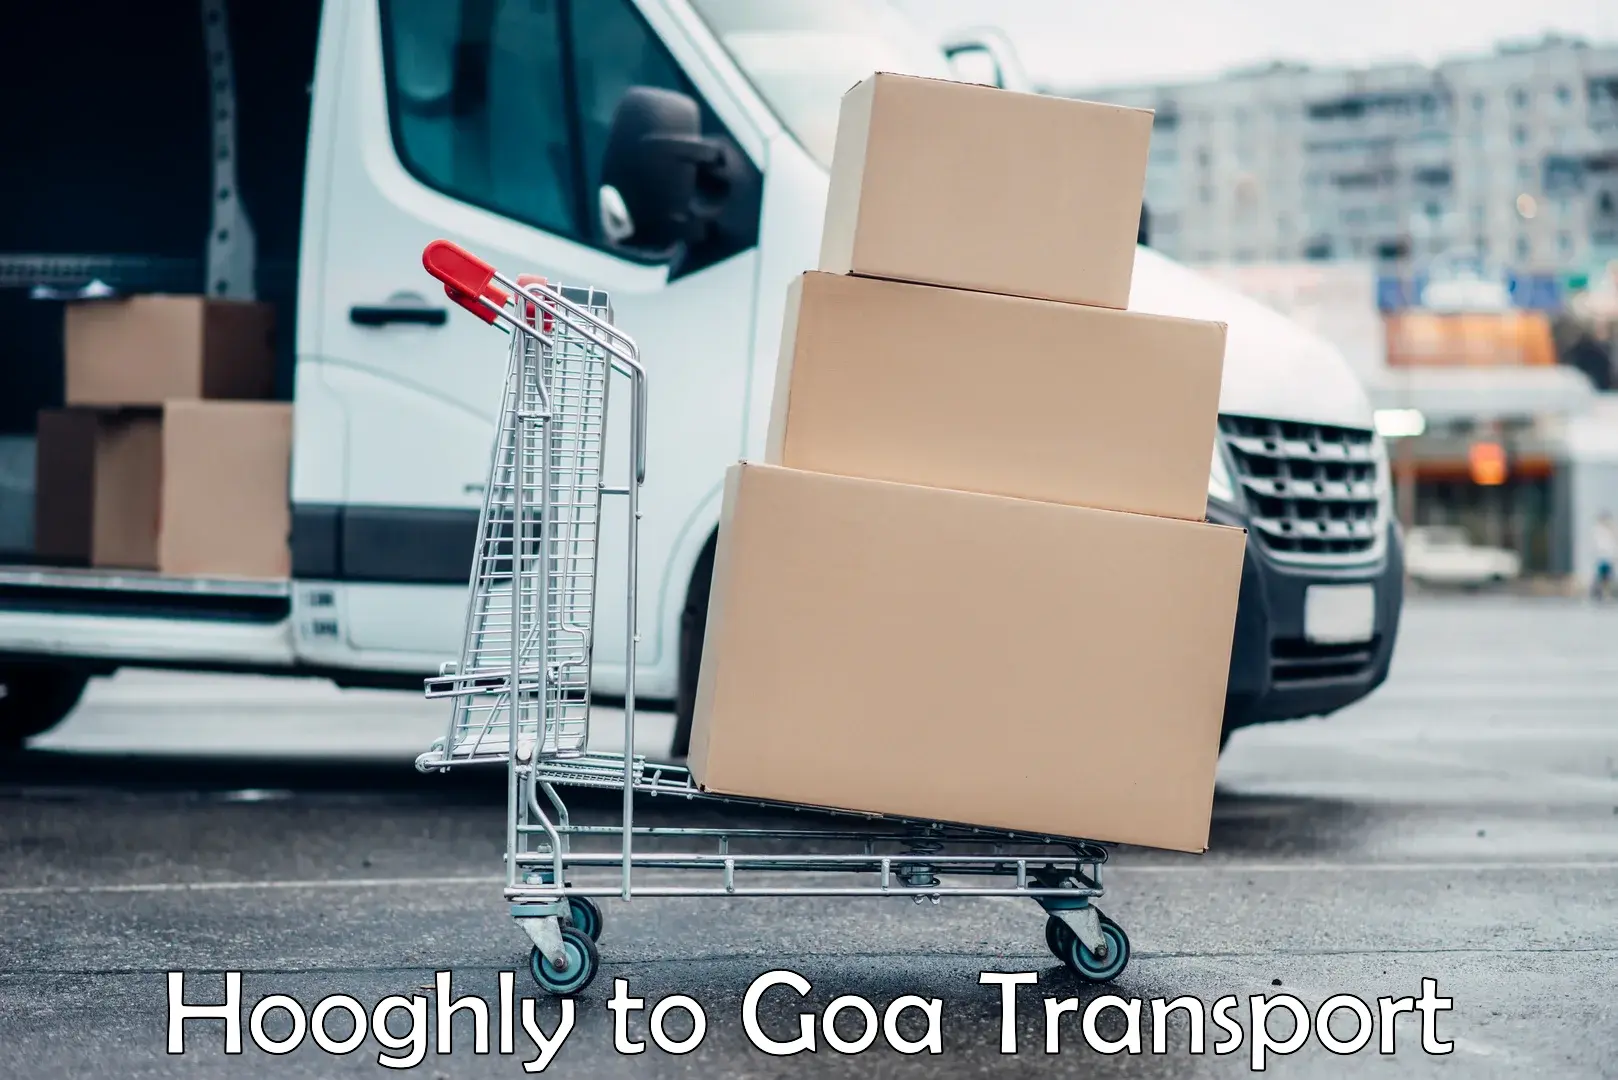 Air cargo transport services Hooghly to Goa